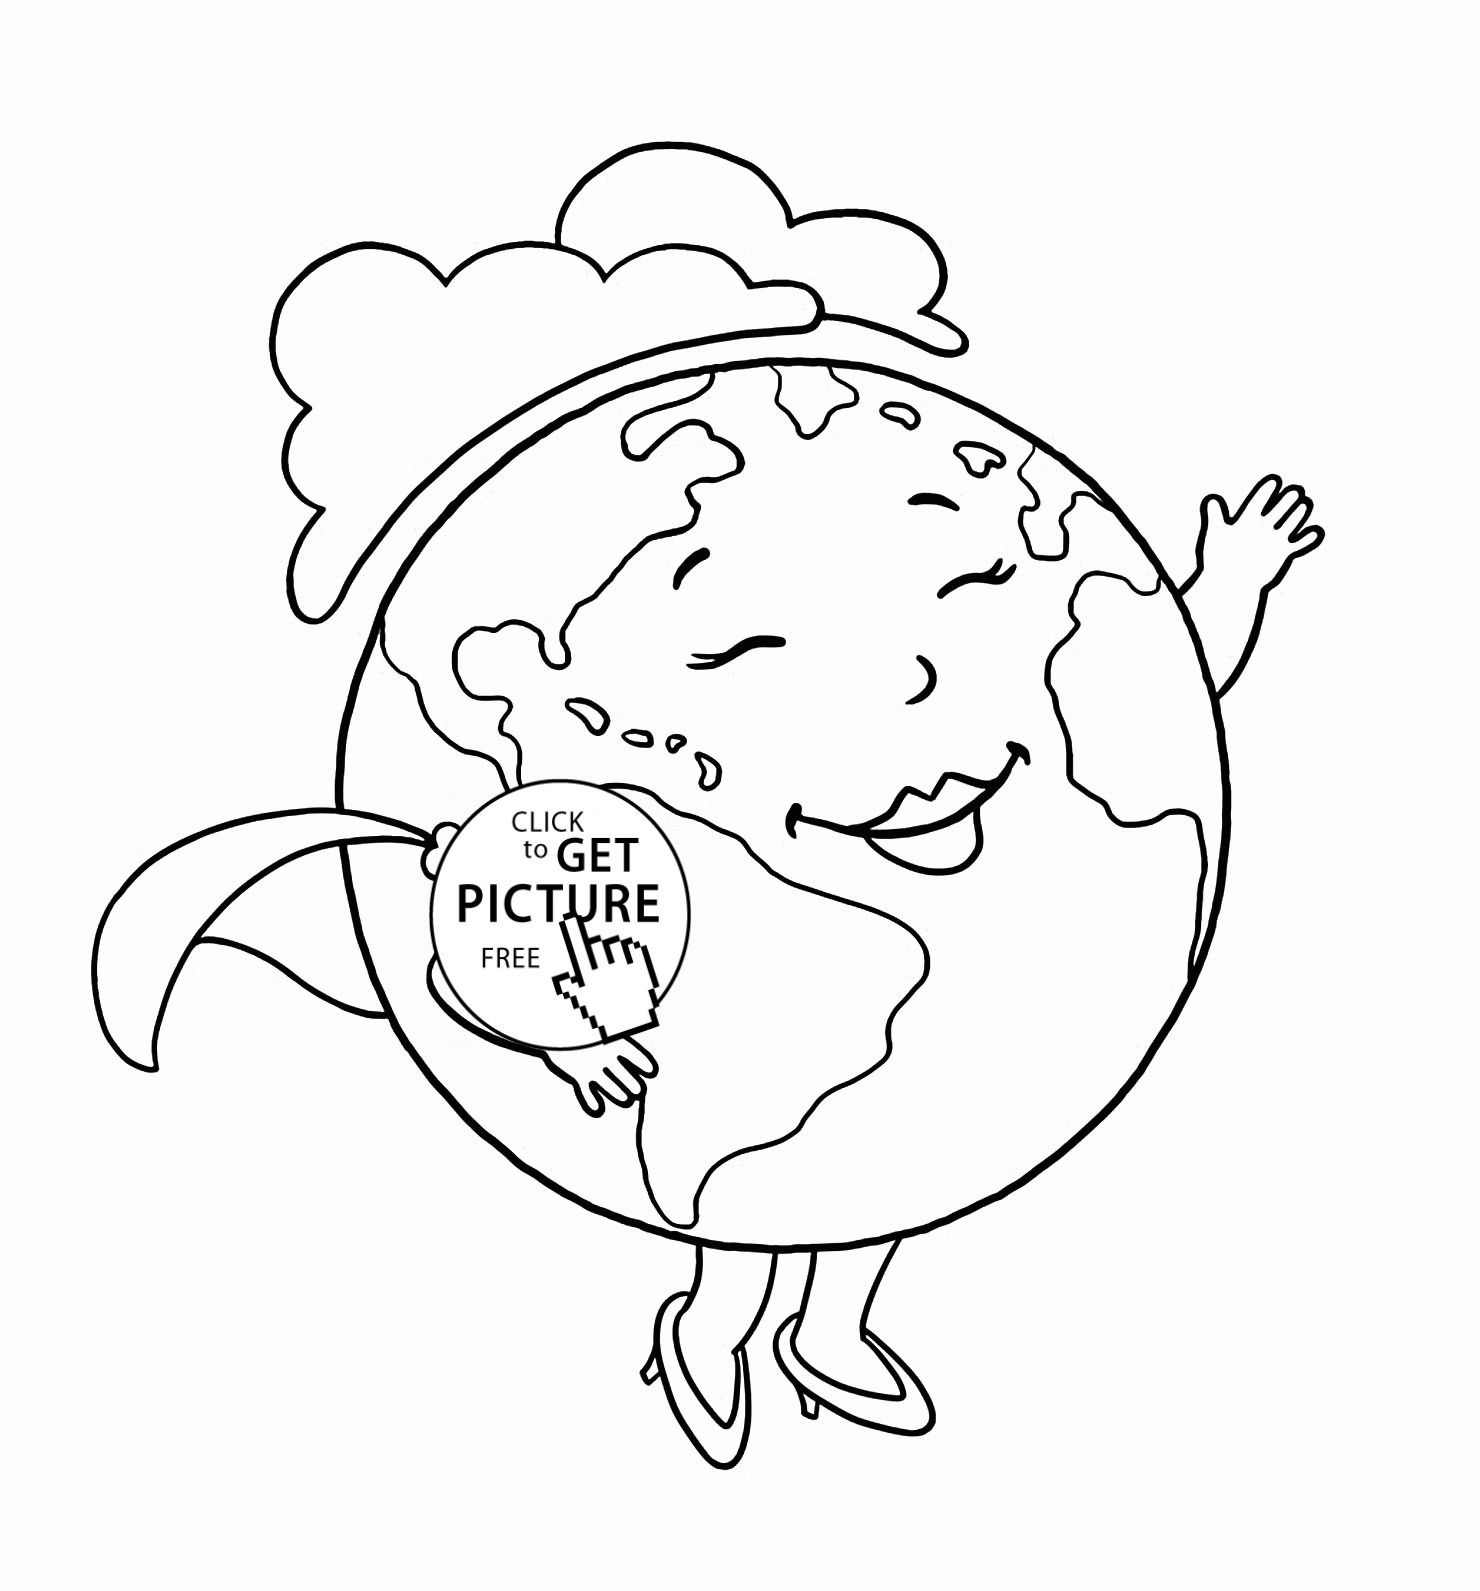 Download Save Earth Coloring Pages - Coloring Home